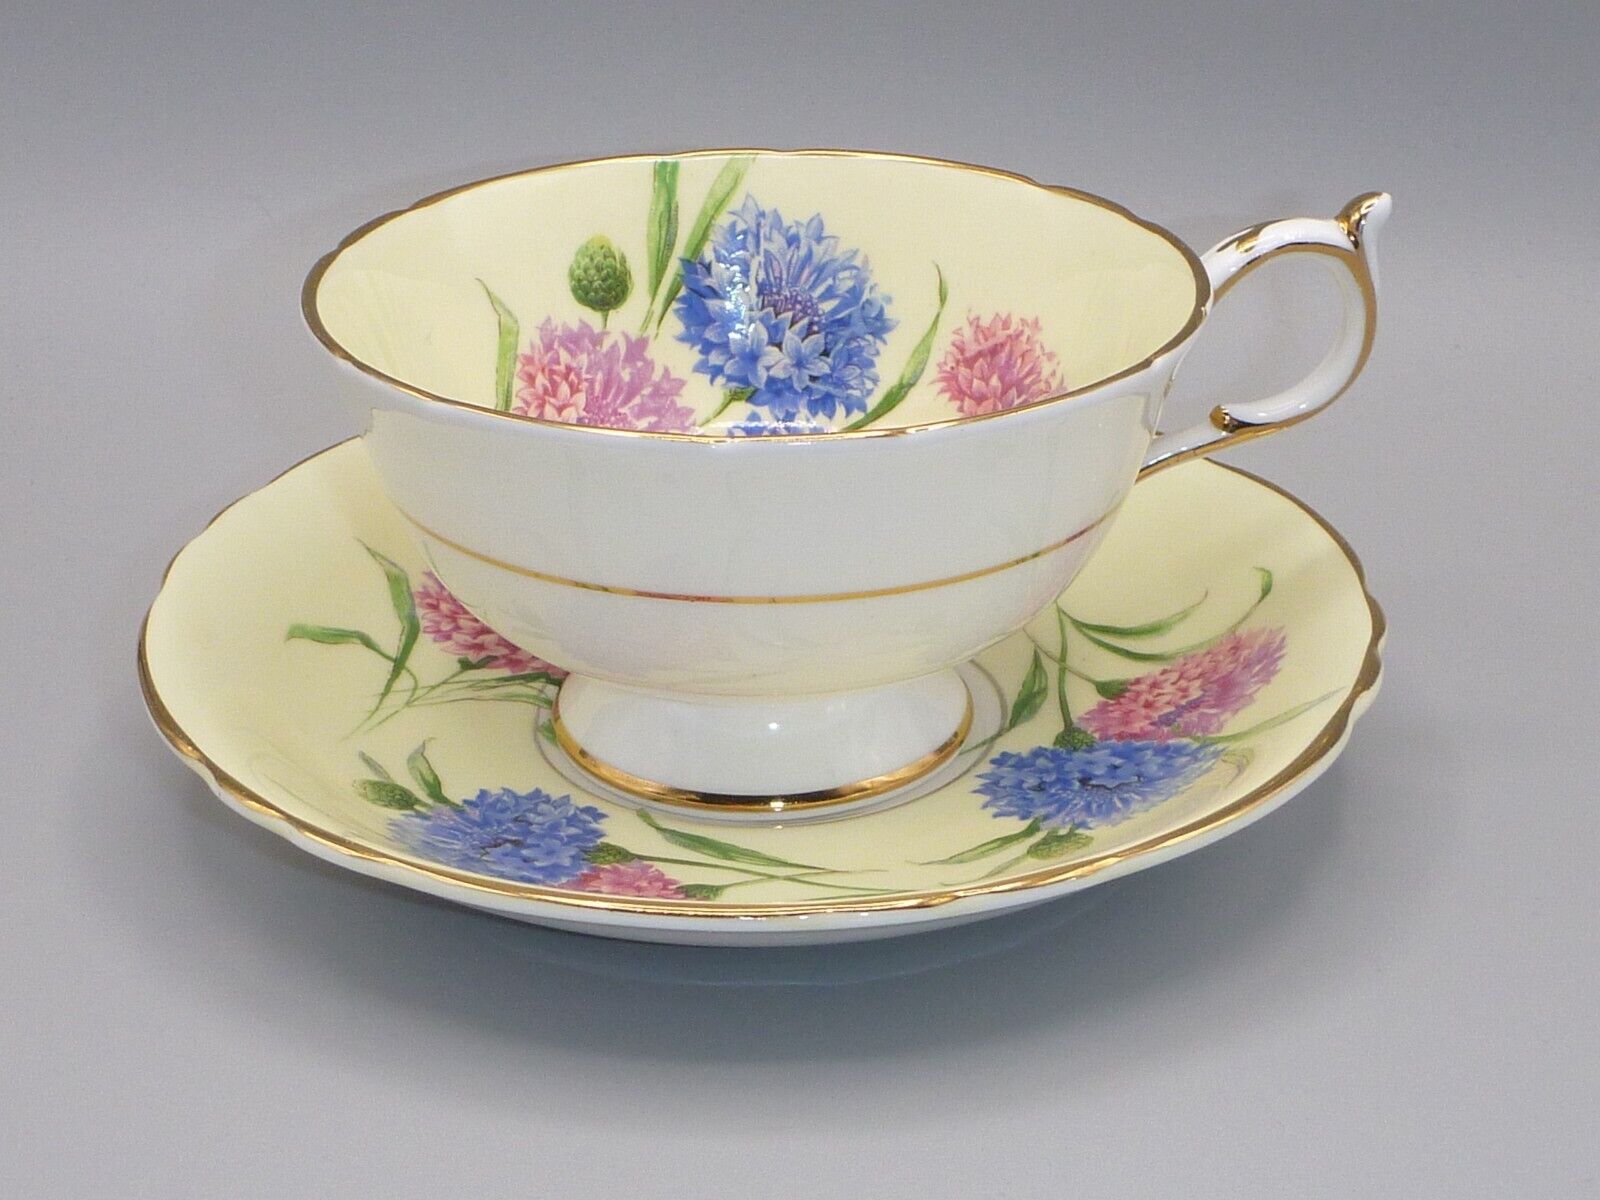 PARAGON DOUBLE WARRANT TEACUP & SAUCER SET, YELLOW WITH PINK & BLUE CORNFLOWERS